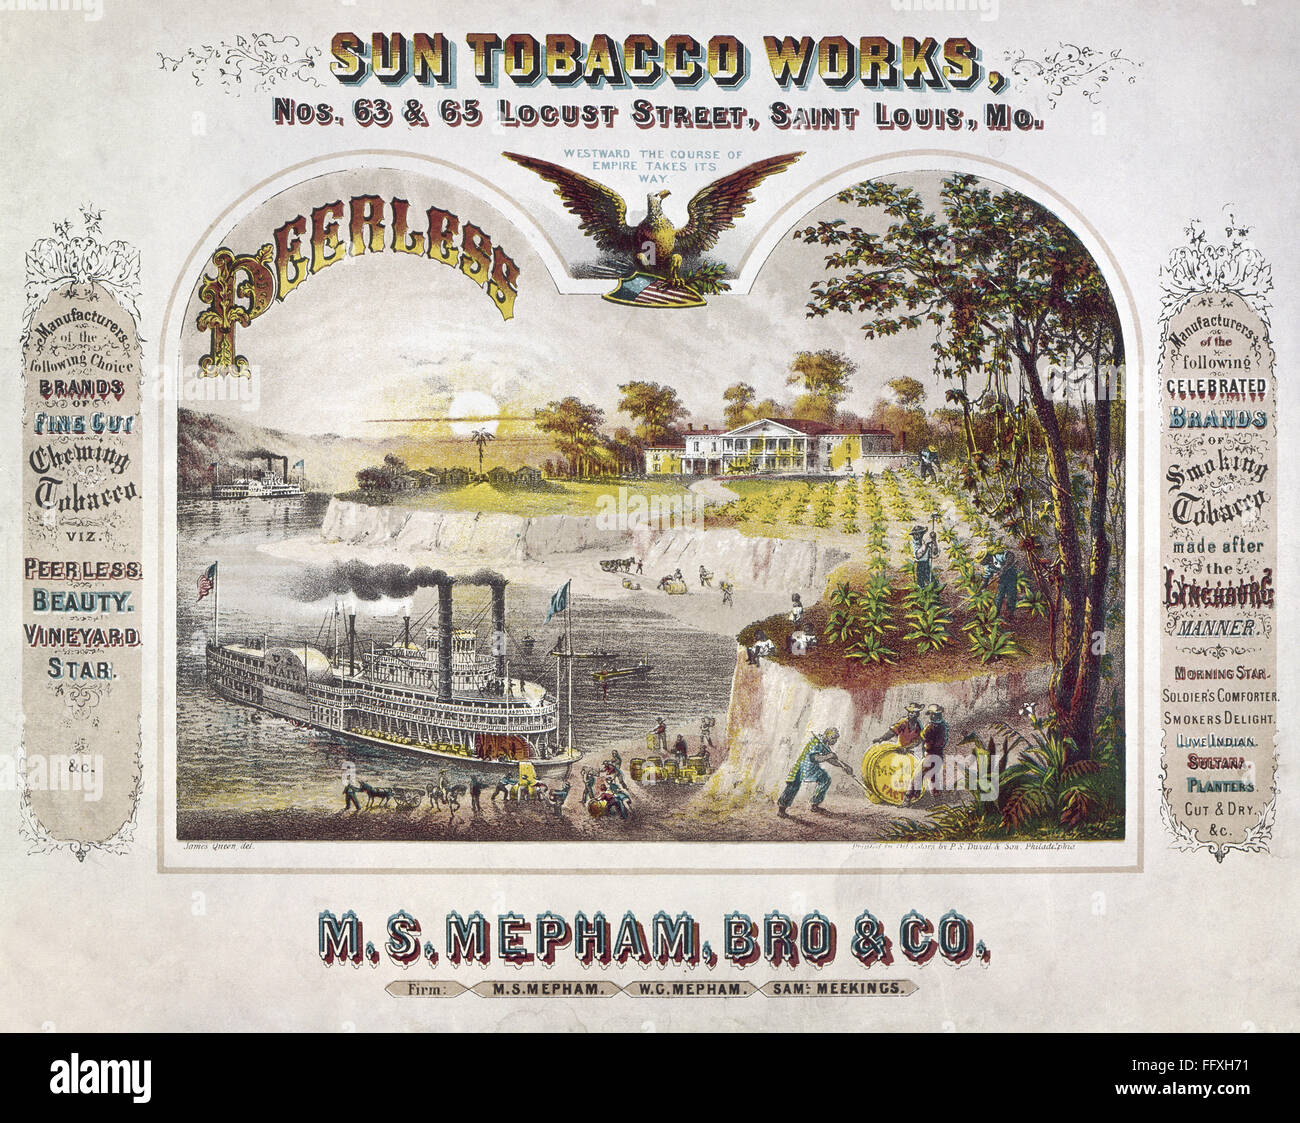 TOBACCO AD, c1860. /nAmerican lithograph advertisement, c1860, for M.S. Mepham & Bro. tobacco products, featuring a depiction of the company's Sun Tobacco Works on the Mississippi River in St. Louis, Missouri. Stock Photo